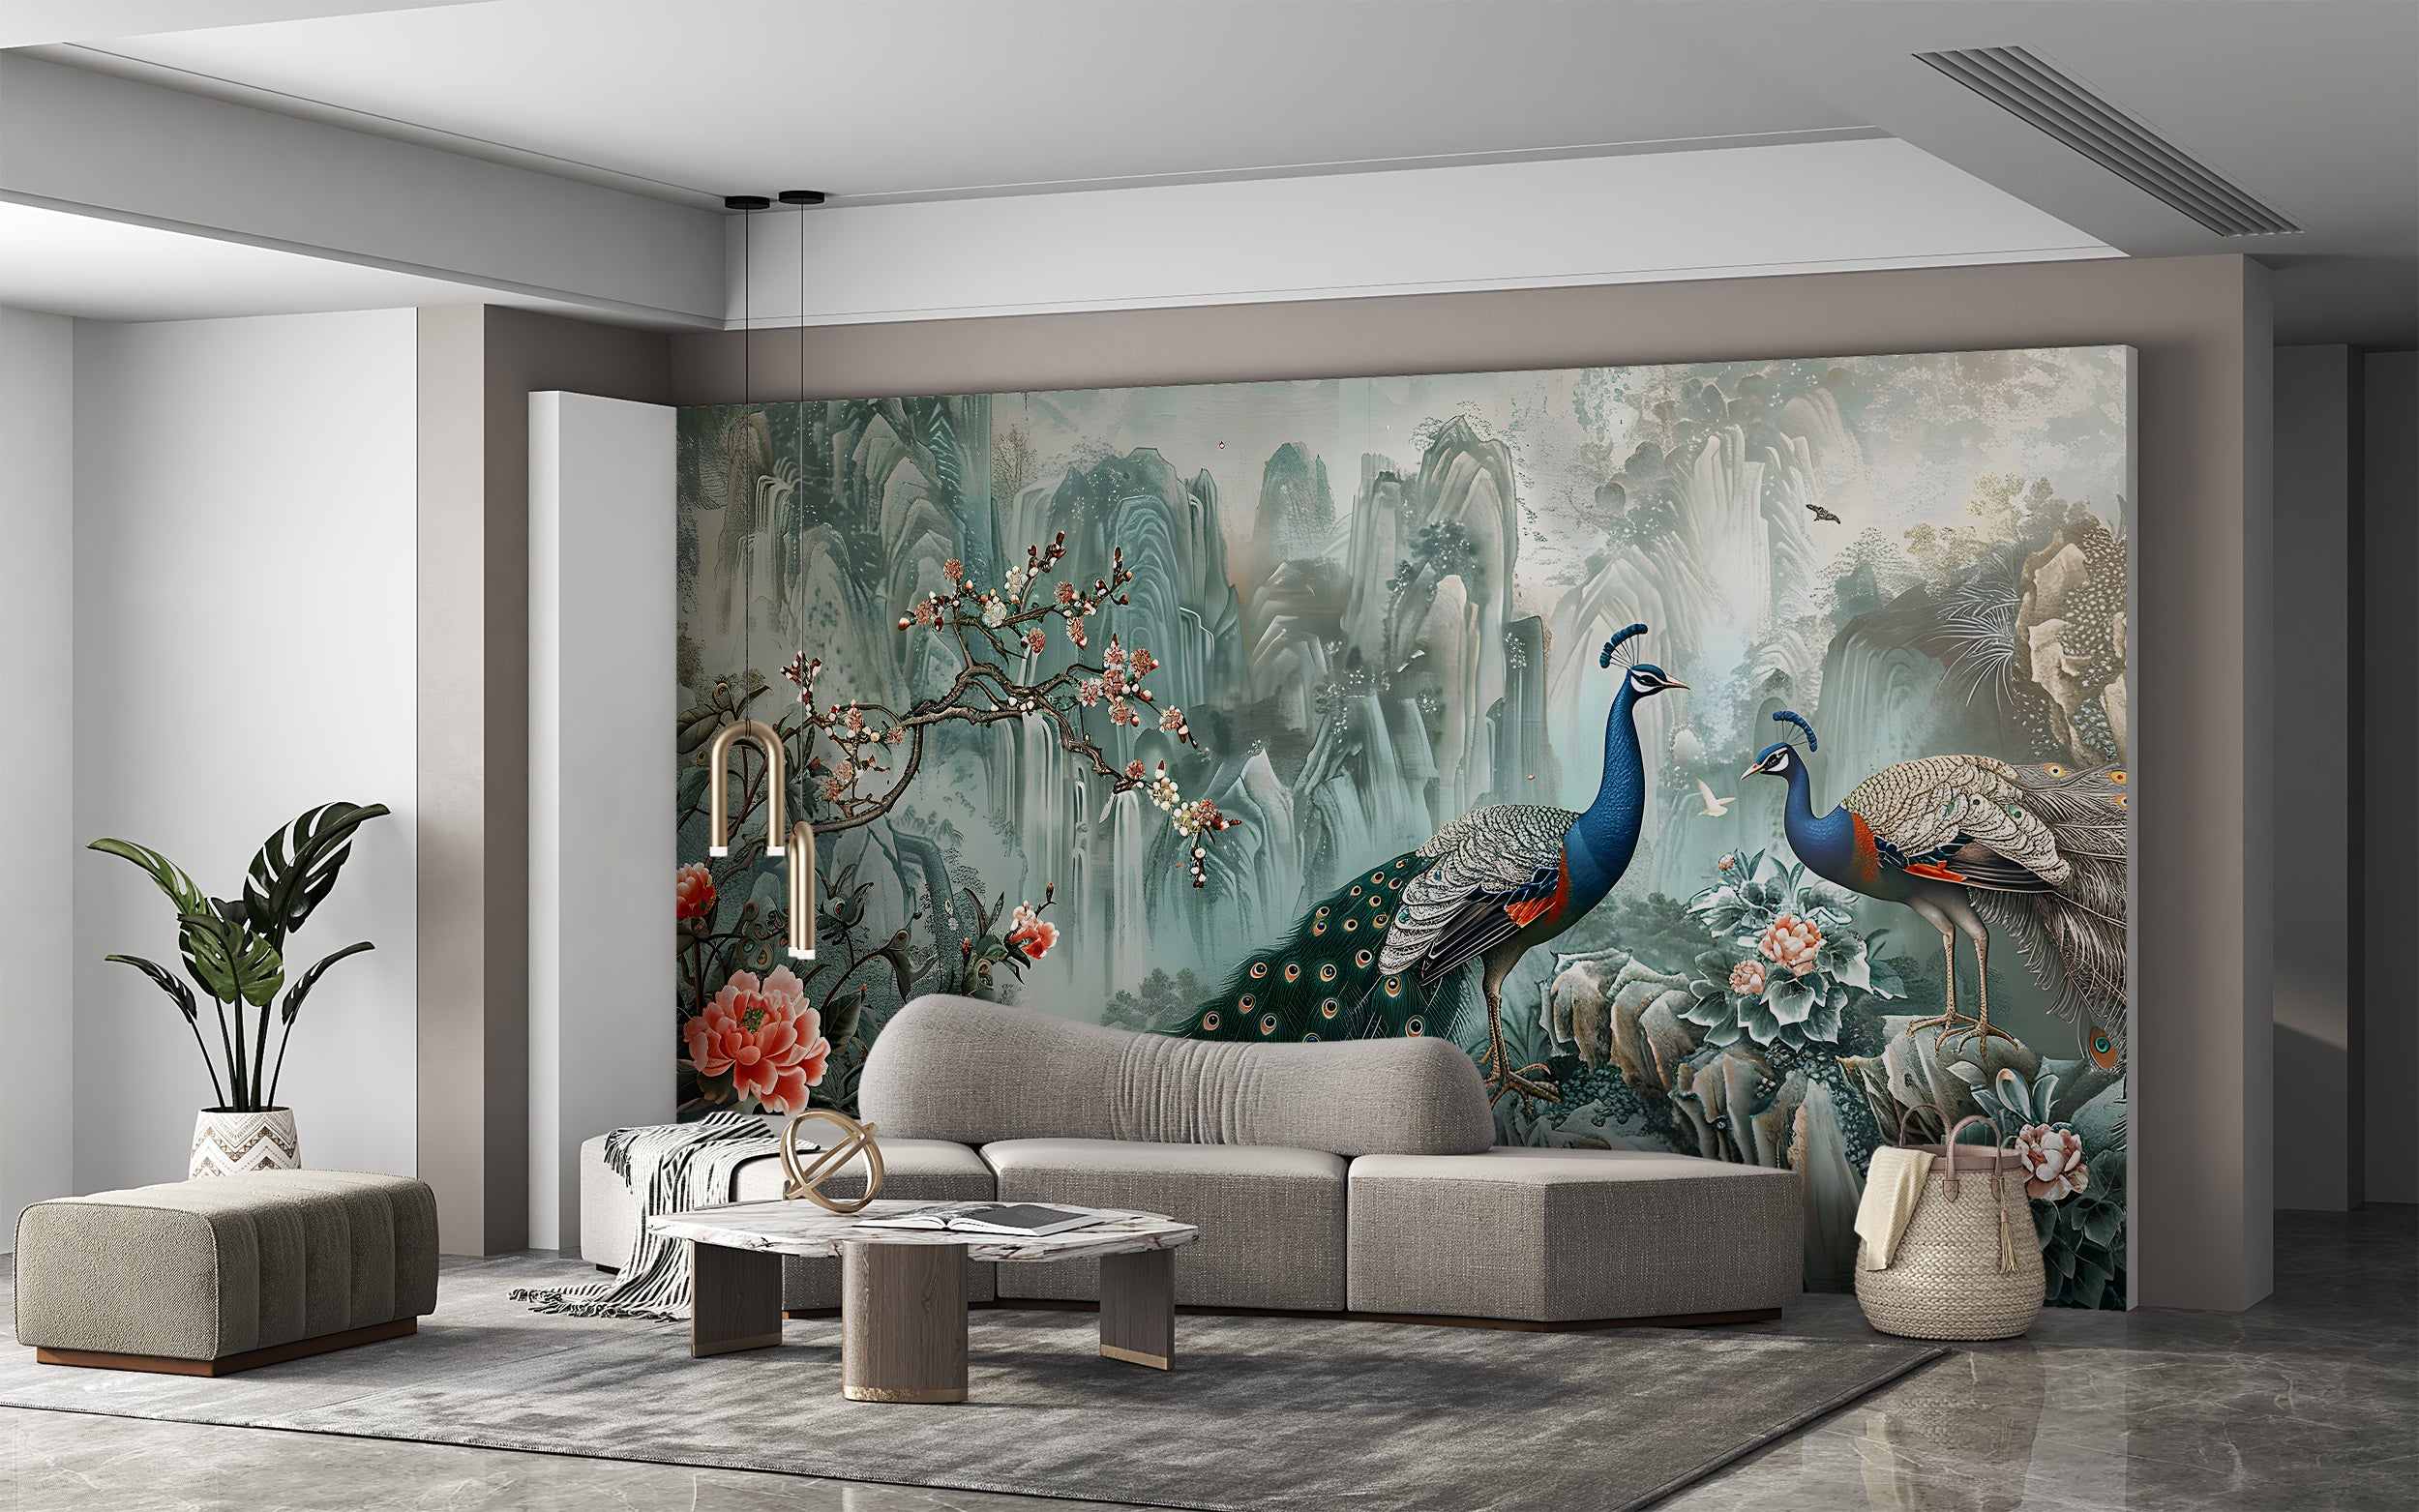 Green Chinoiserie Wallpaper, Peacock Wall Mural, Peel and Stick Abstract Chinese Art, Removable Vintage Decor with Birds and Flowers